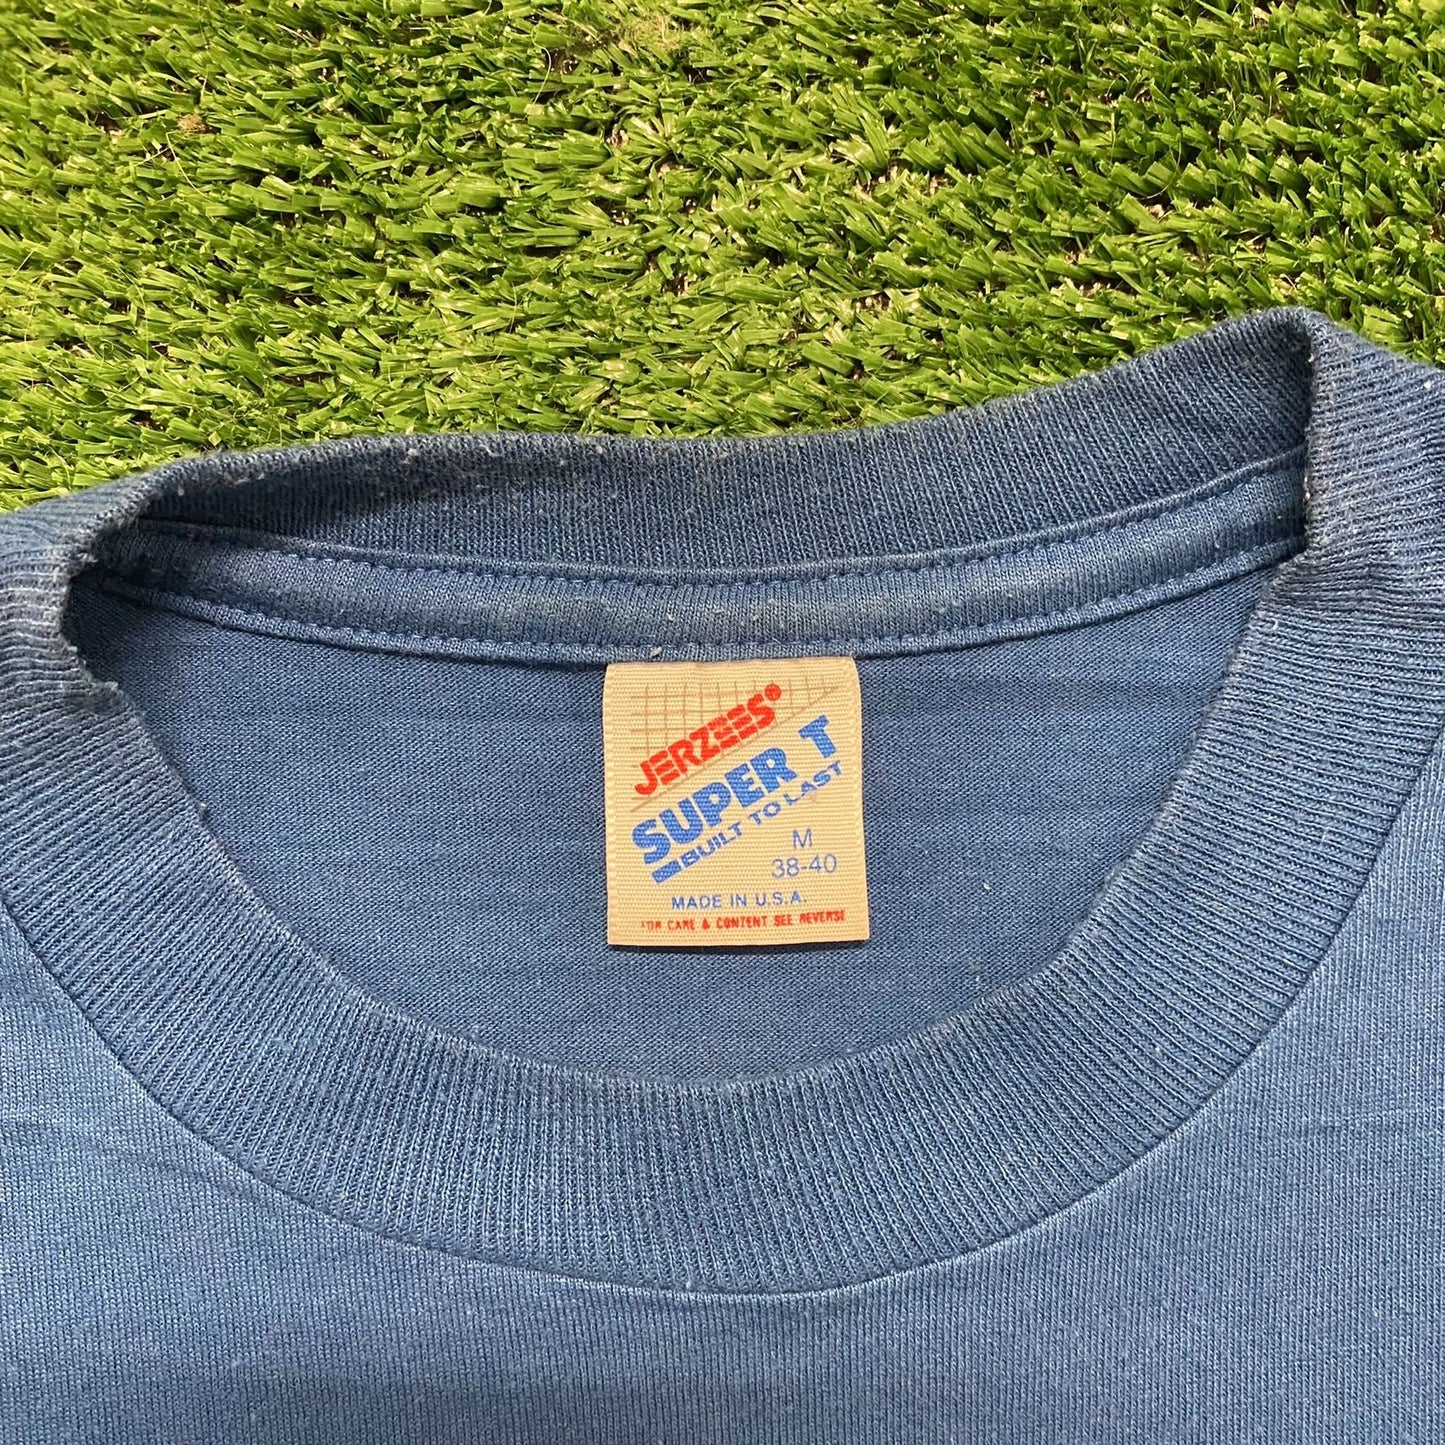 Vintage 80s US Air Force Academy Military Single Stitch Tee